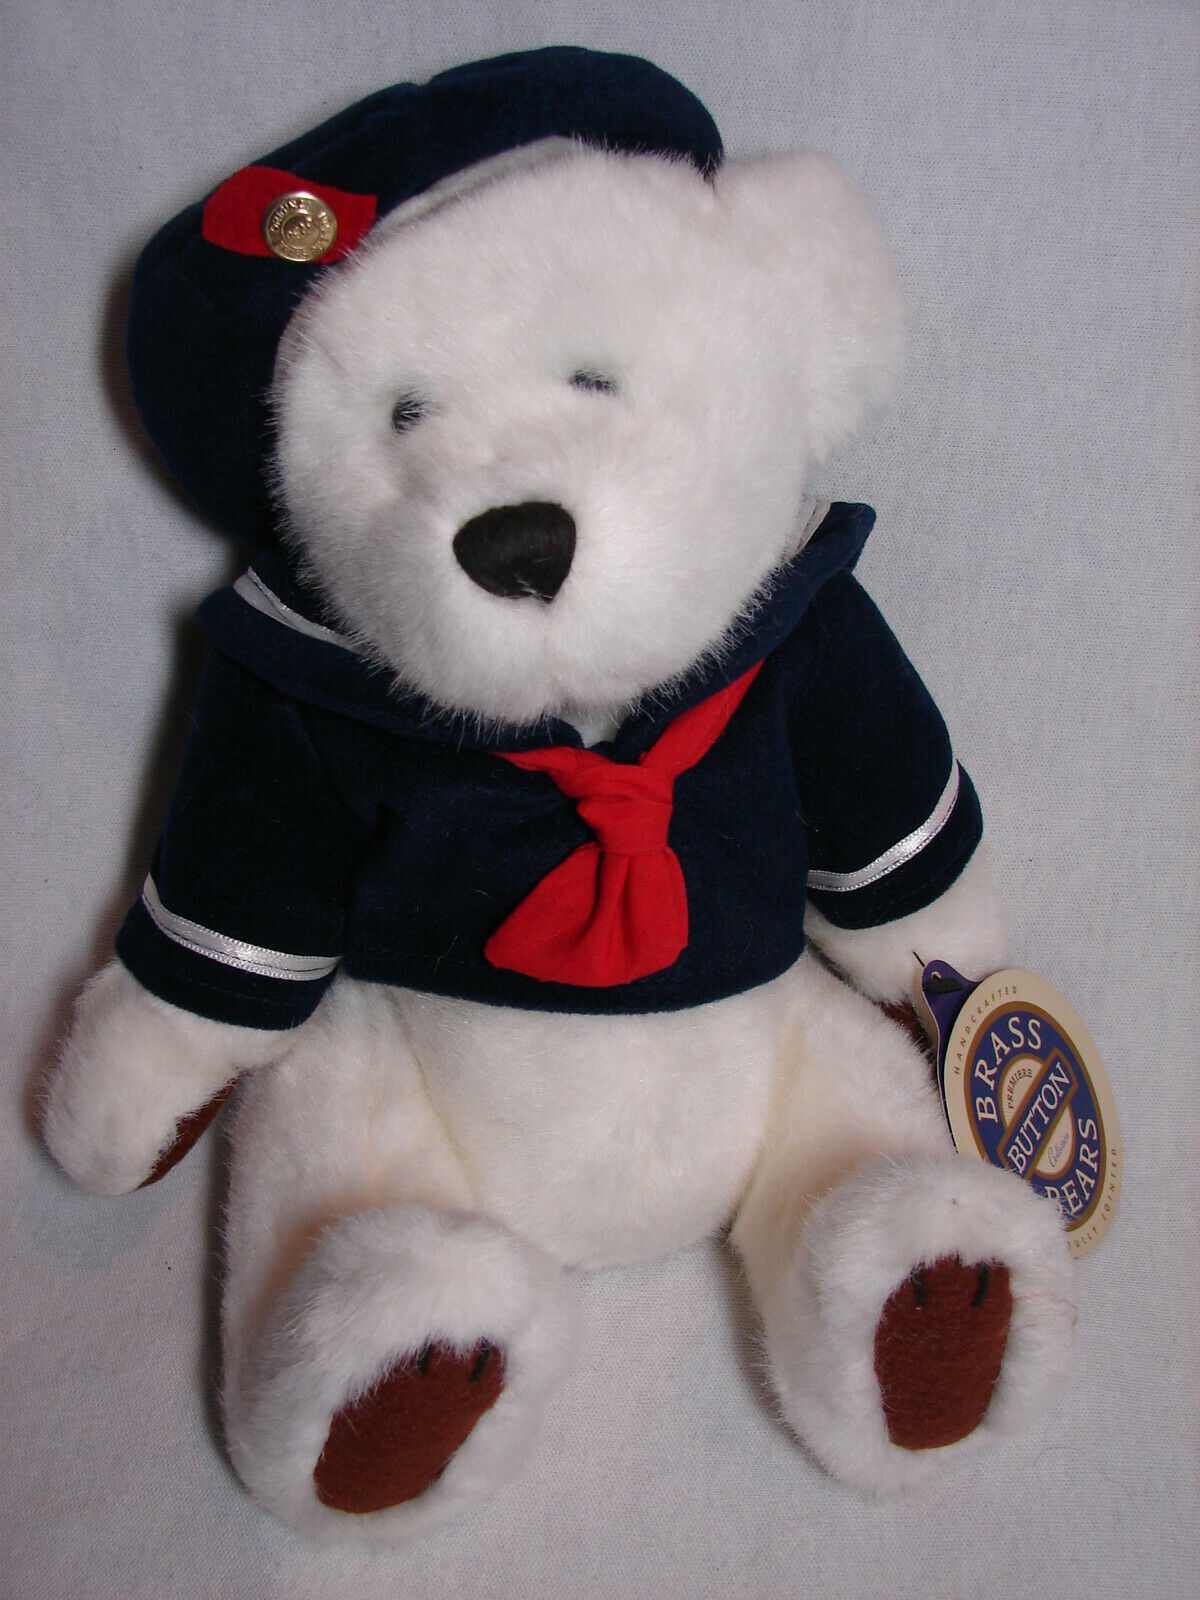 Pickford Brass Button Bears 'bear Of Happiness' Plush Jointed 12"  Teddy Bear